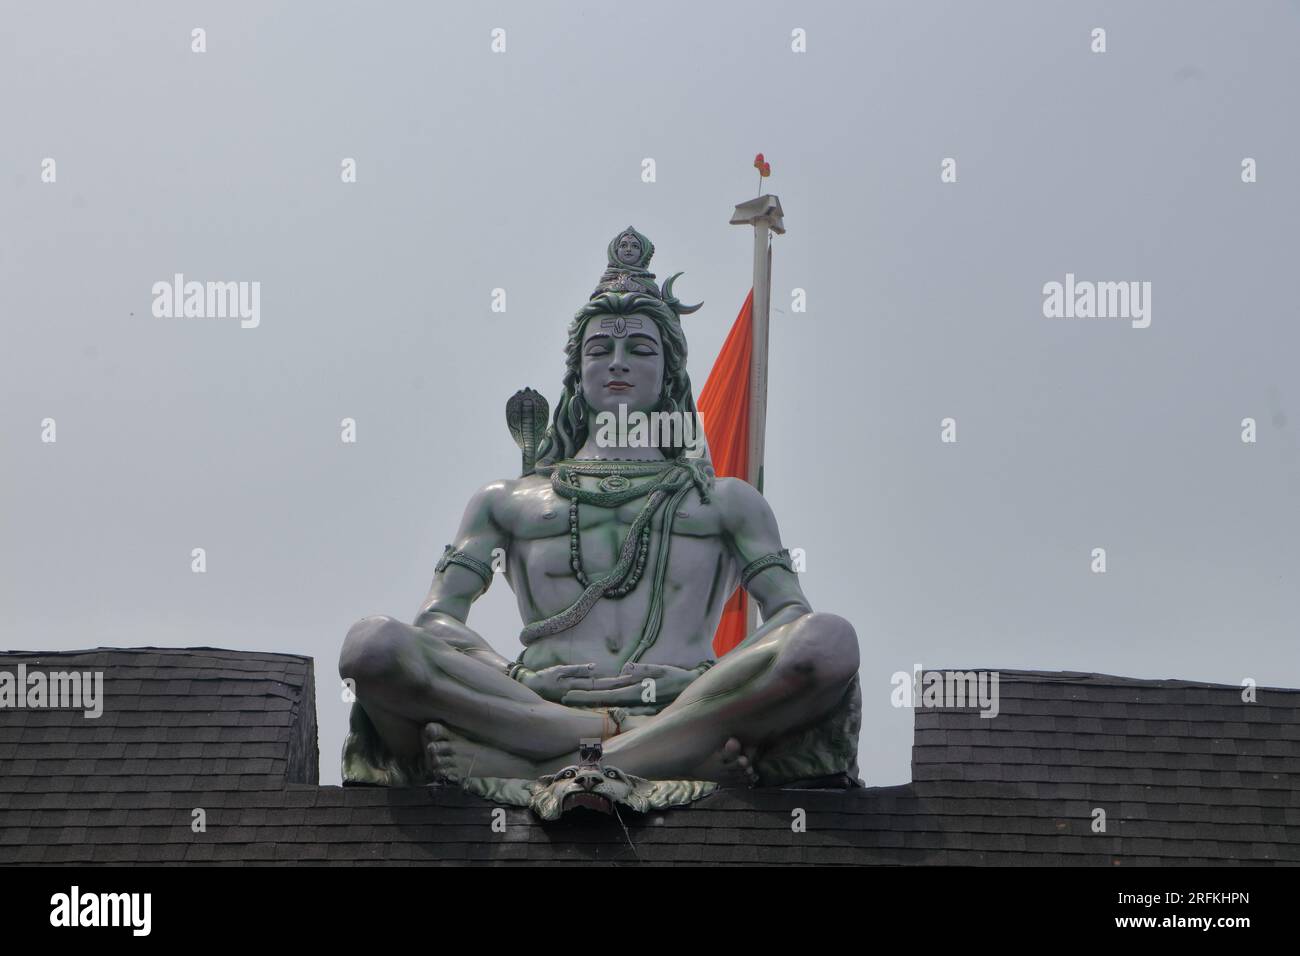 Chant 'Om' to feel Lord Shiva in your soul